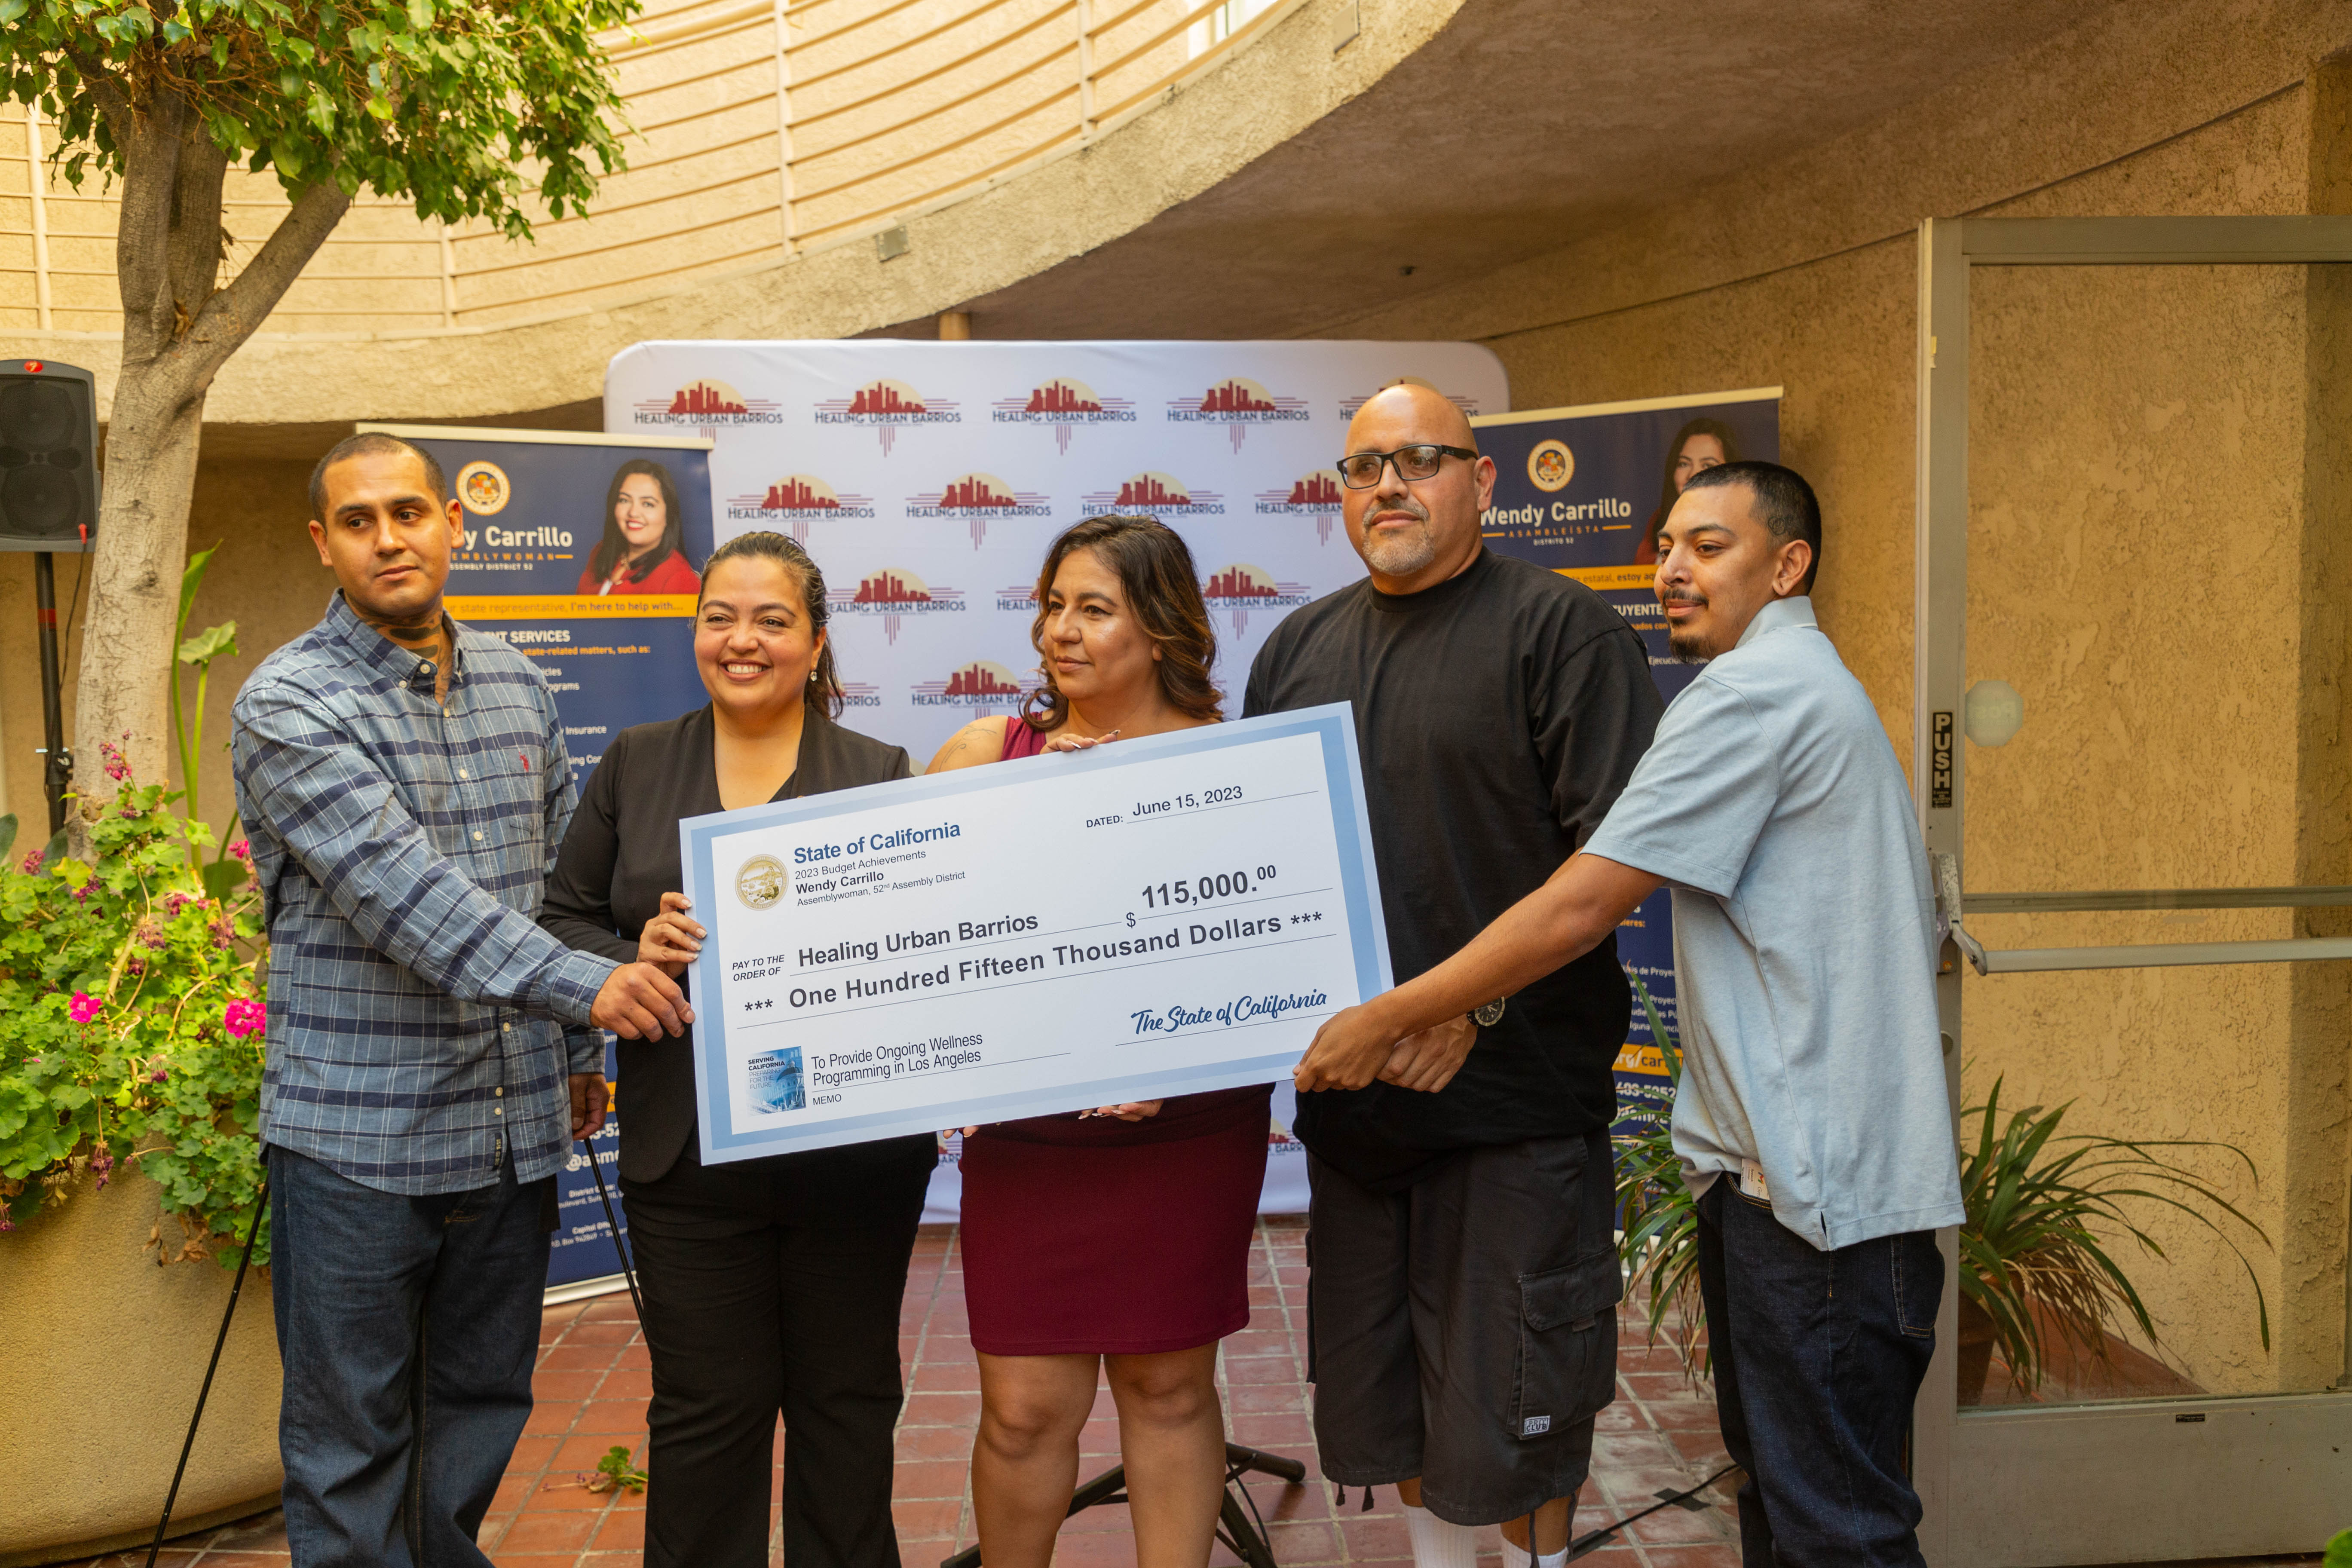 Assemblywoman Wendy Carrillo holds large symbolic check of $115,000 with Healing Urban Barrios